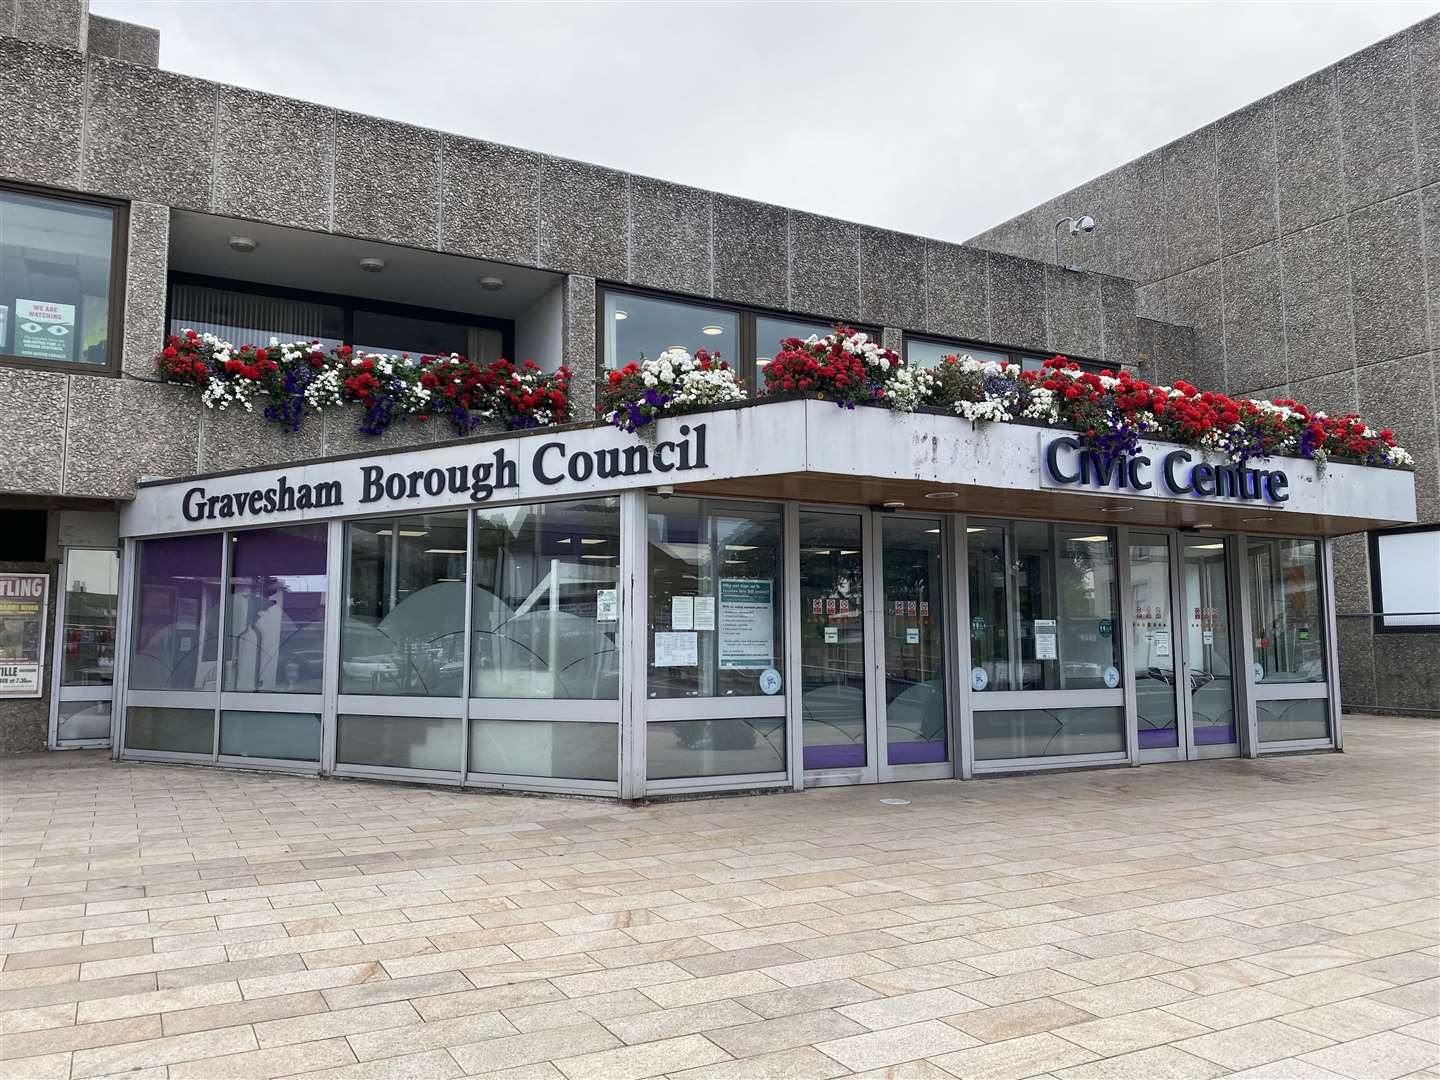 Gravesham Borough Council offices in Gravesend